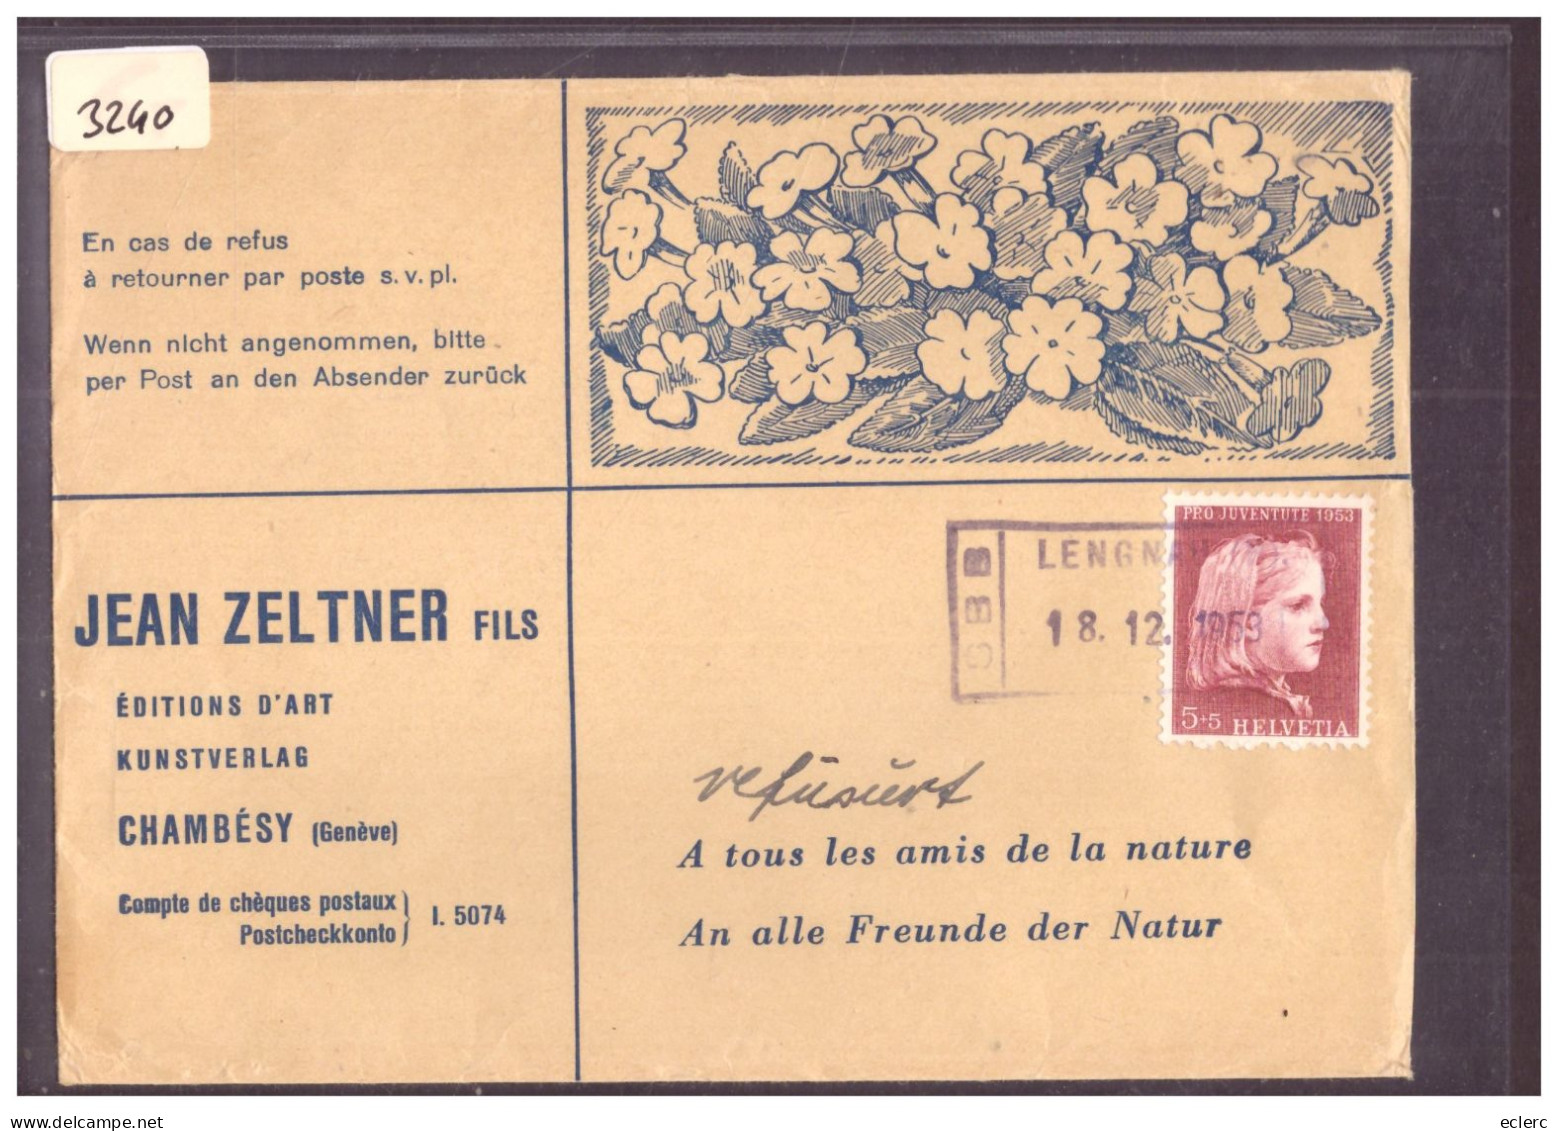 LETTRE A ENTÊTE - CHAMBESY GENEVE - EDITIONS D'ART JEAN ZELTNER Fils - Lettres & Documents